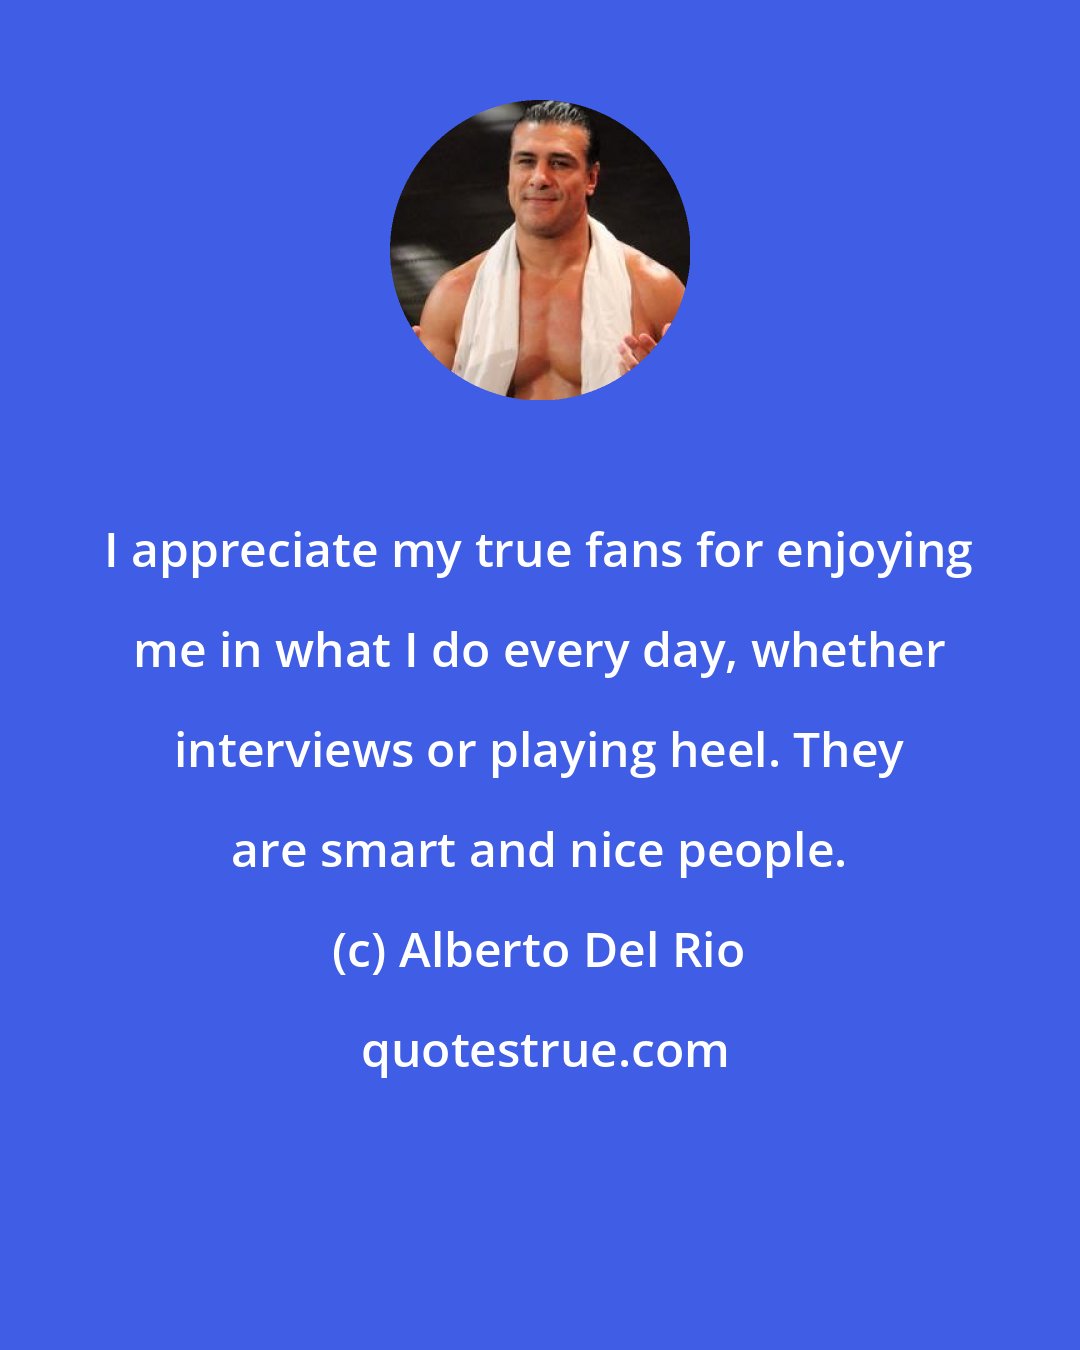 Alberto Del Rio: I appreciate my true fans for enjoying me in what I do every day, whether interviews or playing heel. They are smart and nice people.